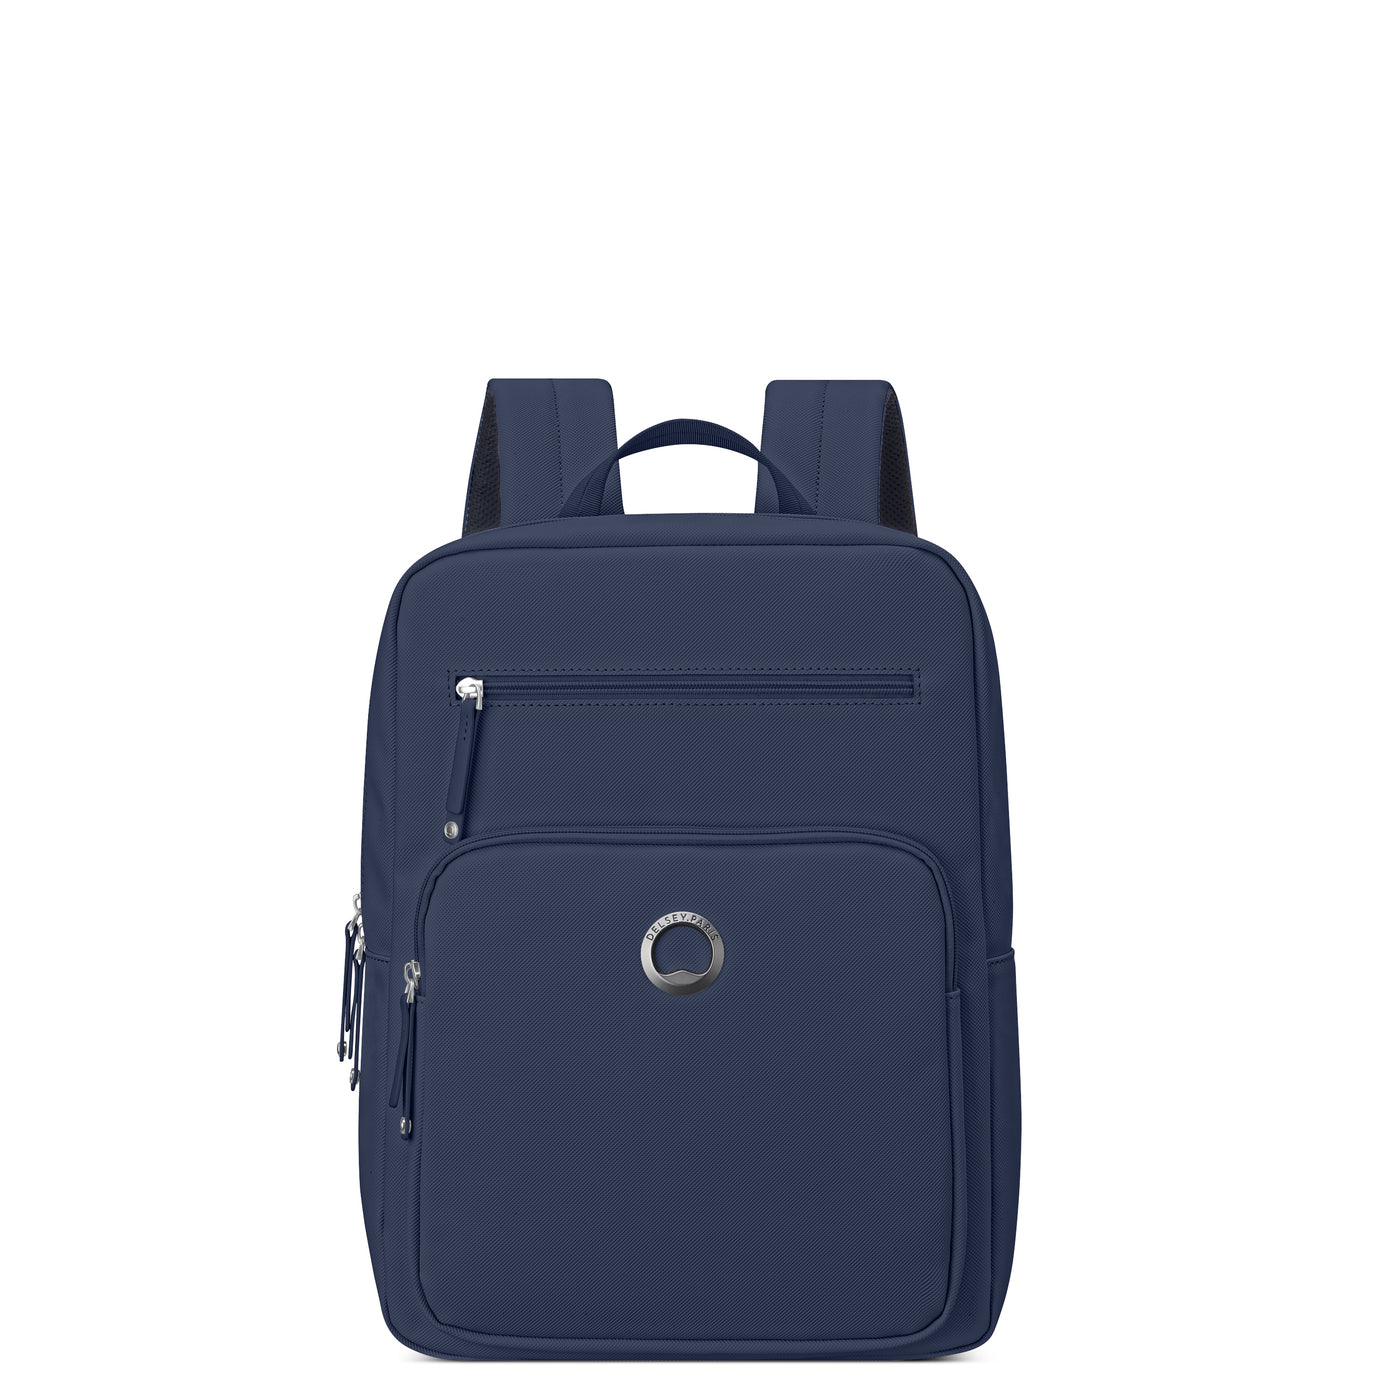 Shop The Latest Collection Of Delsey Lepic Backpack M In Lebanon